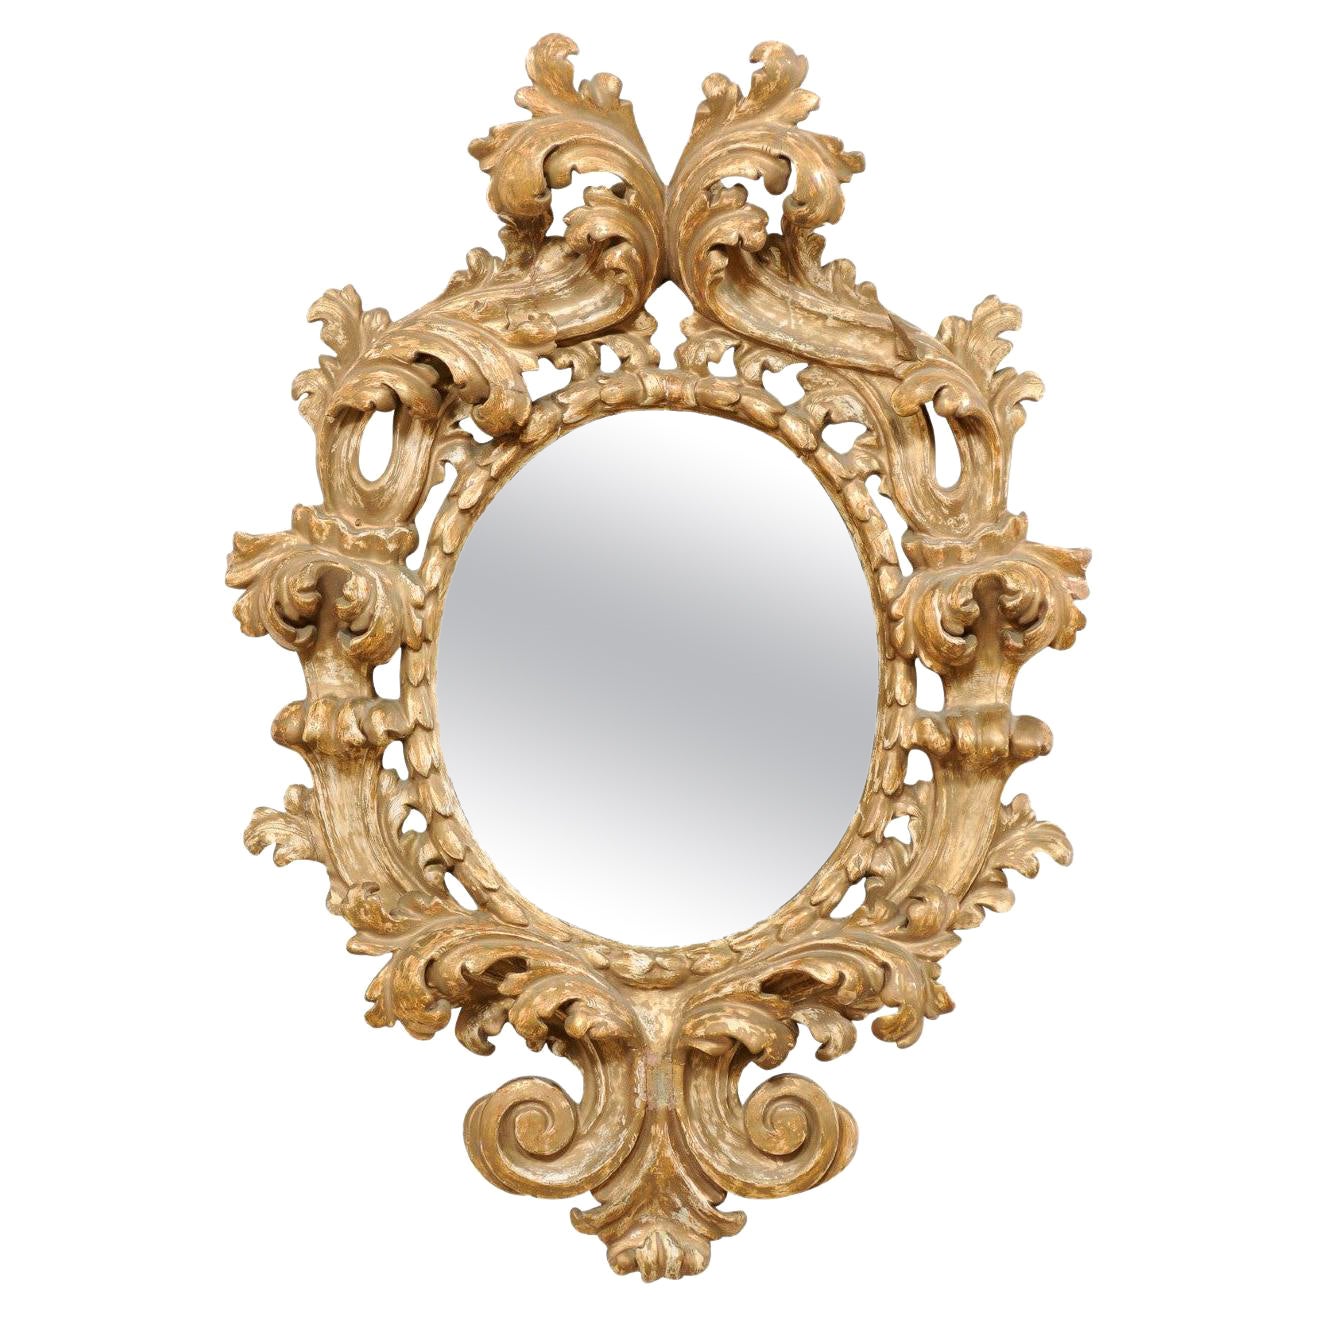 Italian Ornate Acanthus-Carved Mirror w/Oblong, Oval-Shaped Glass, 18th/19th C.